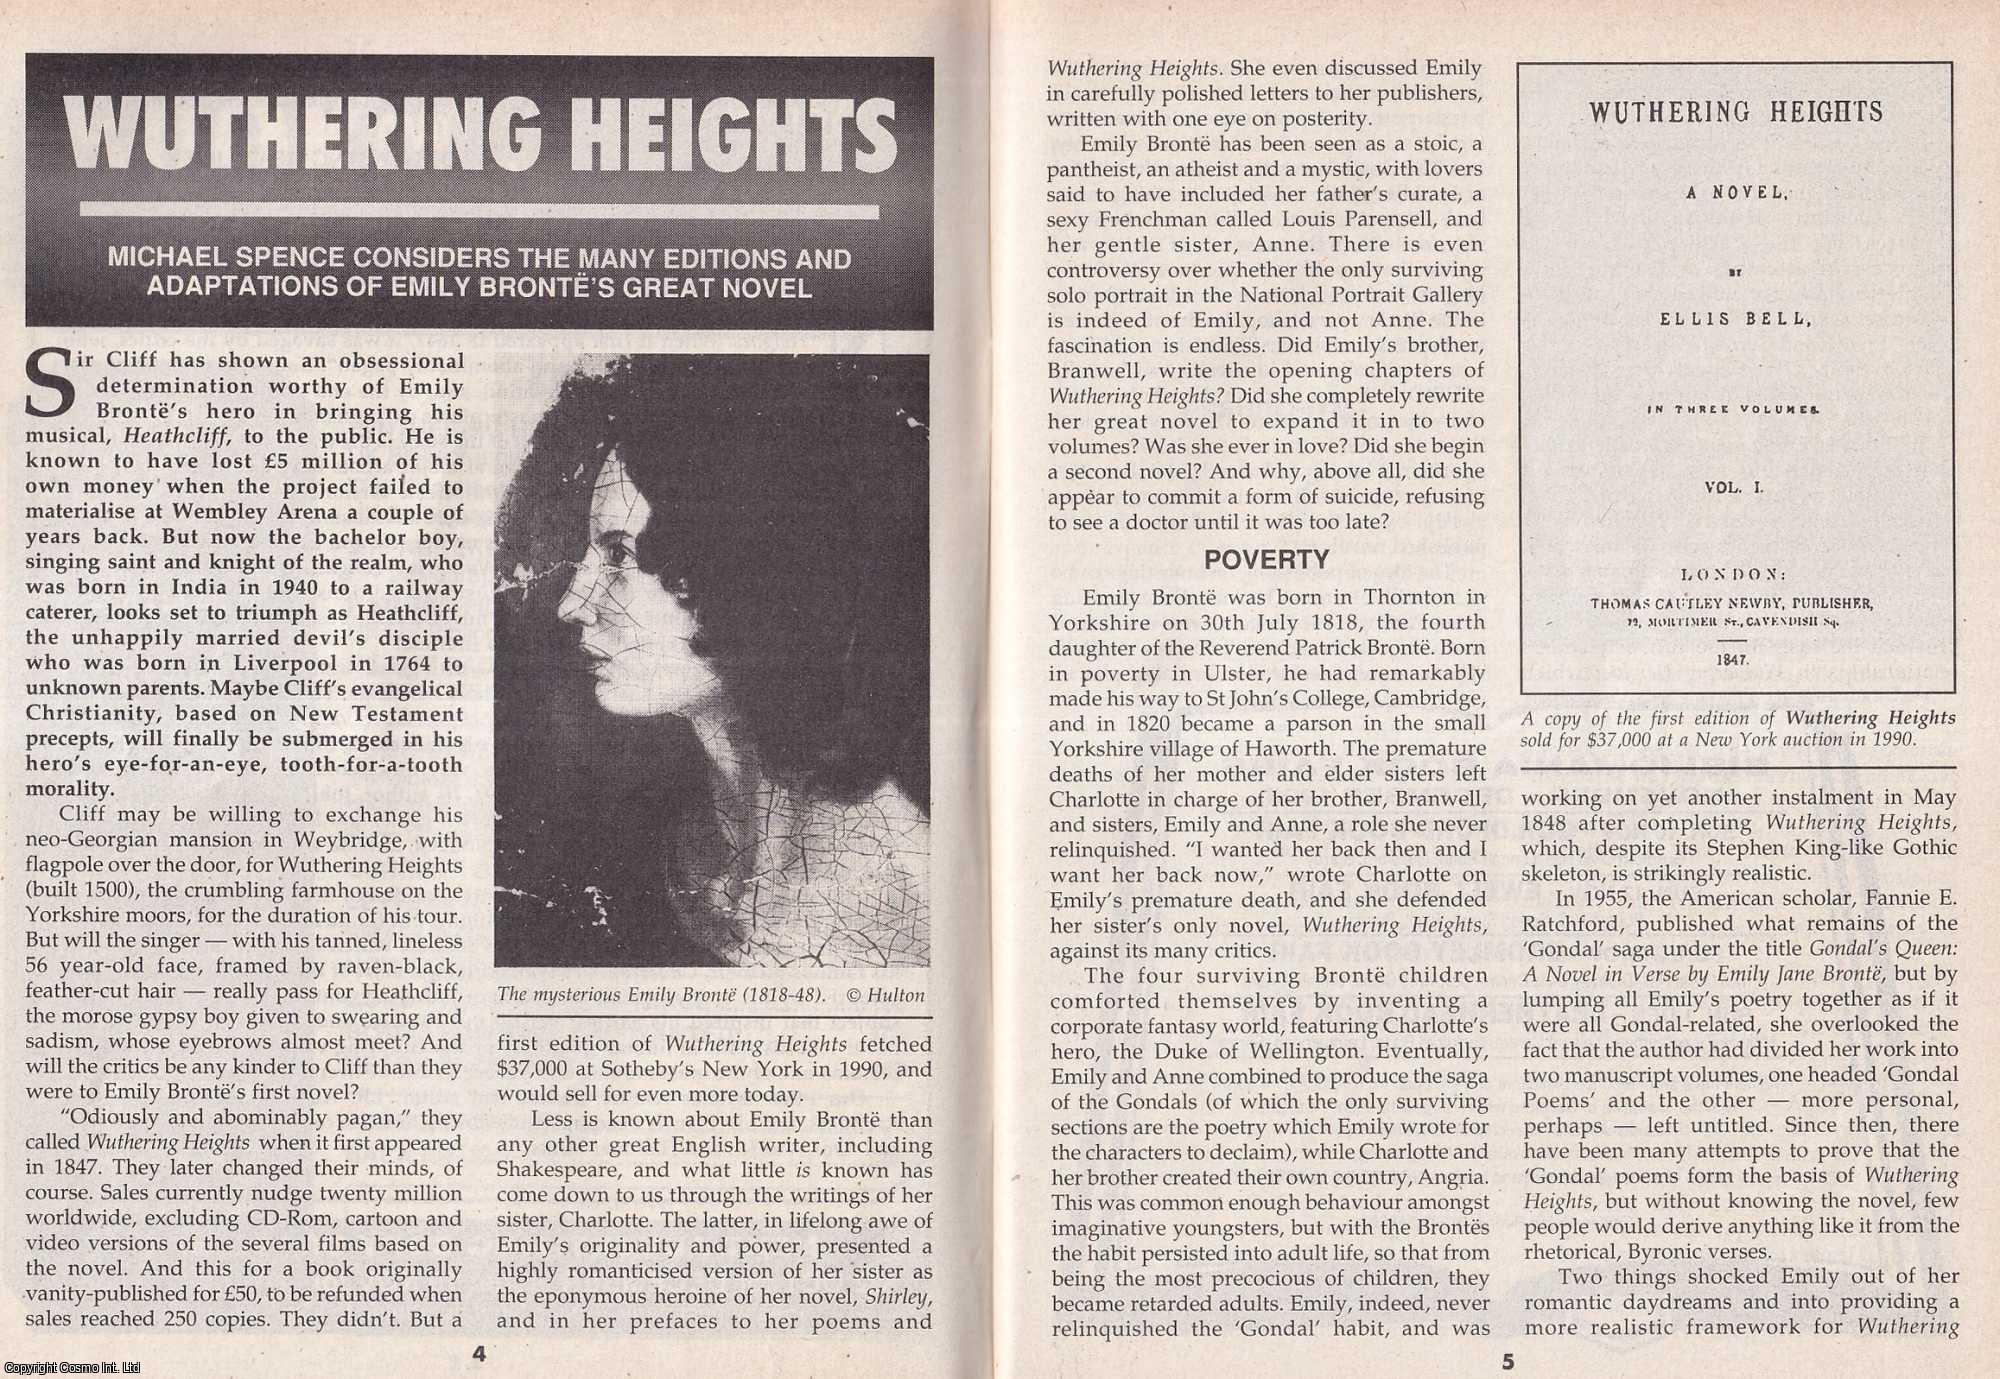 Michael Spence - Wuthering Heights : The Many Editions & Adaptations of Emily Bronte's Great Novel. This is an original article separated from an issue of The Book & Magazine Collector publication.